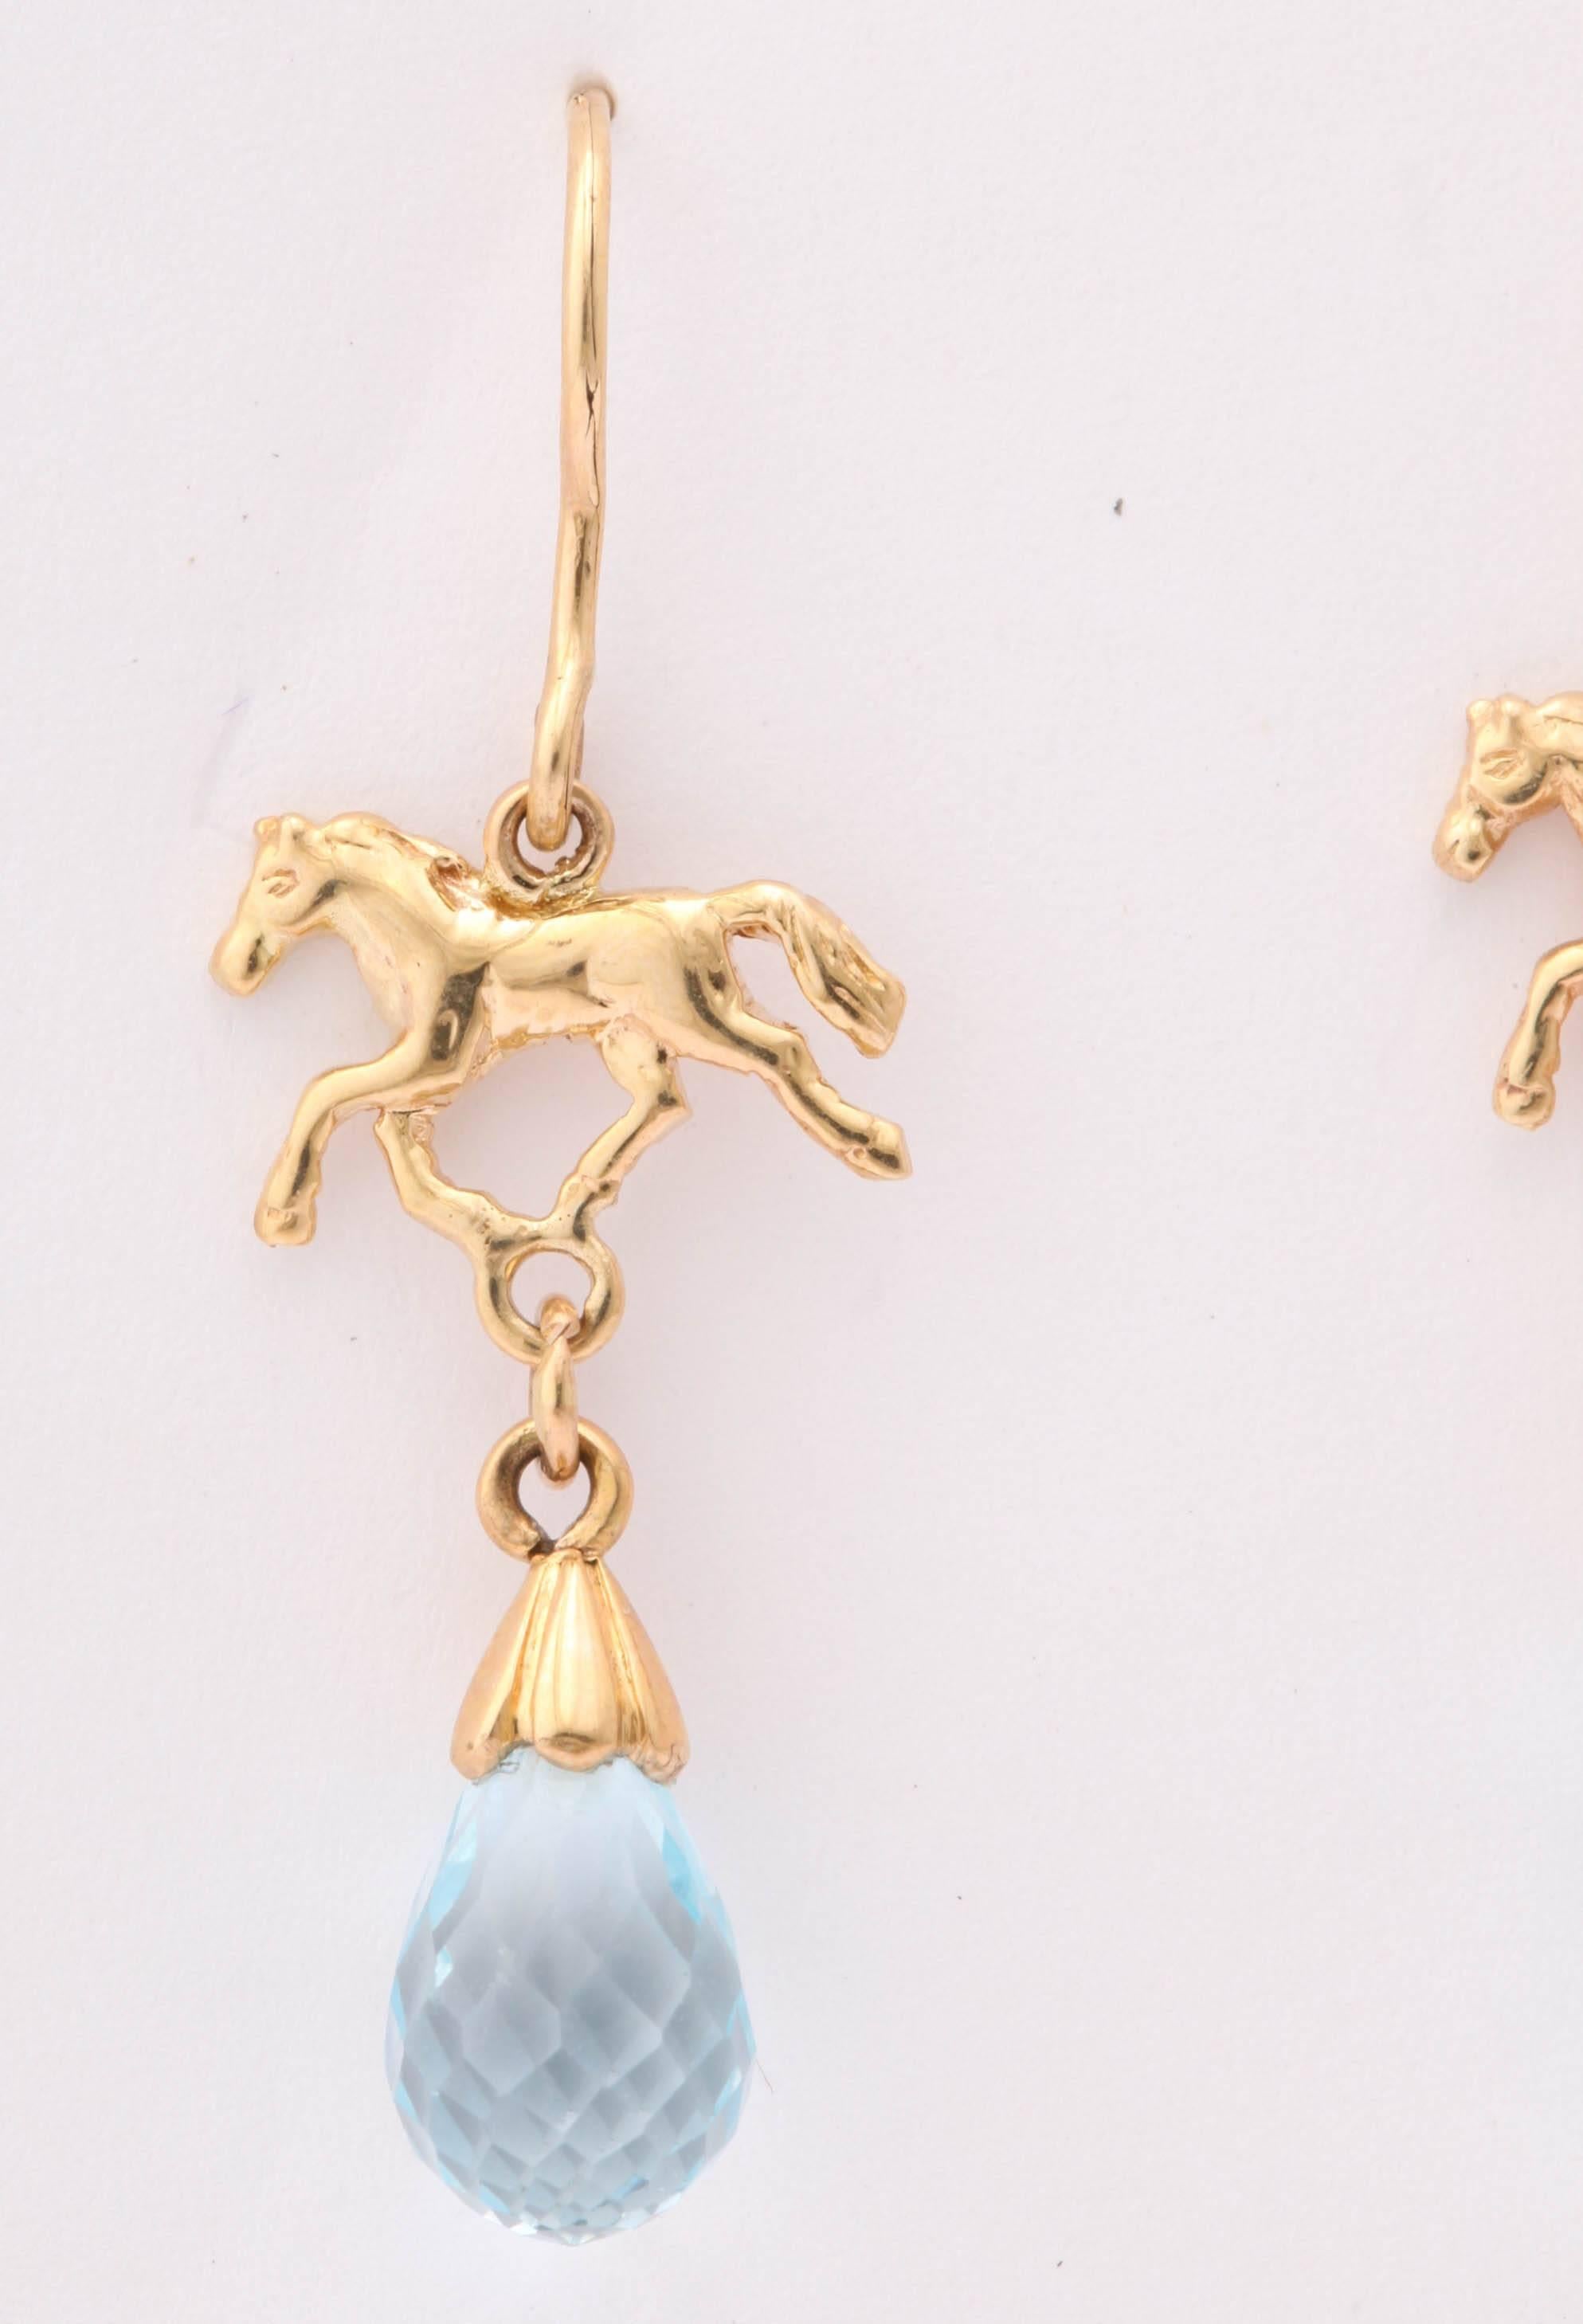 These 14kt earrings are great for an equestrian enthusiast of any age. They dangle beautifully from a kidney wire and allow the briolette movement.
